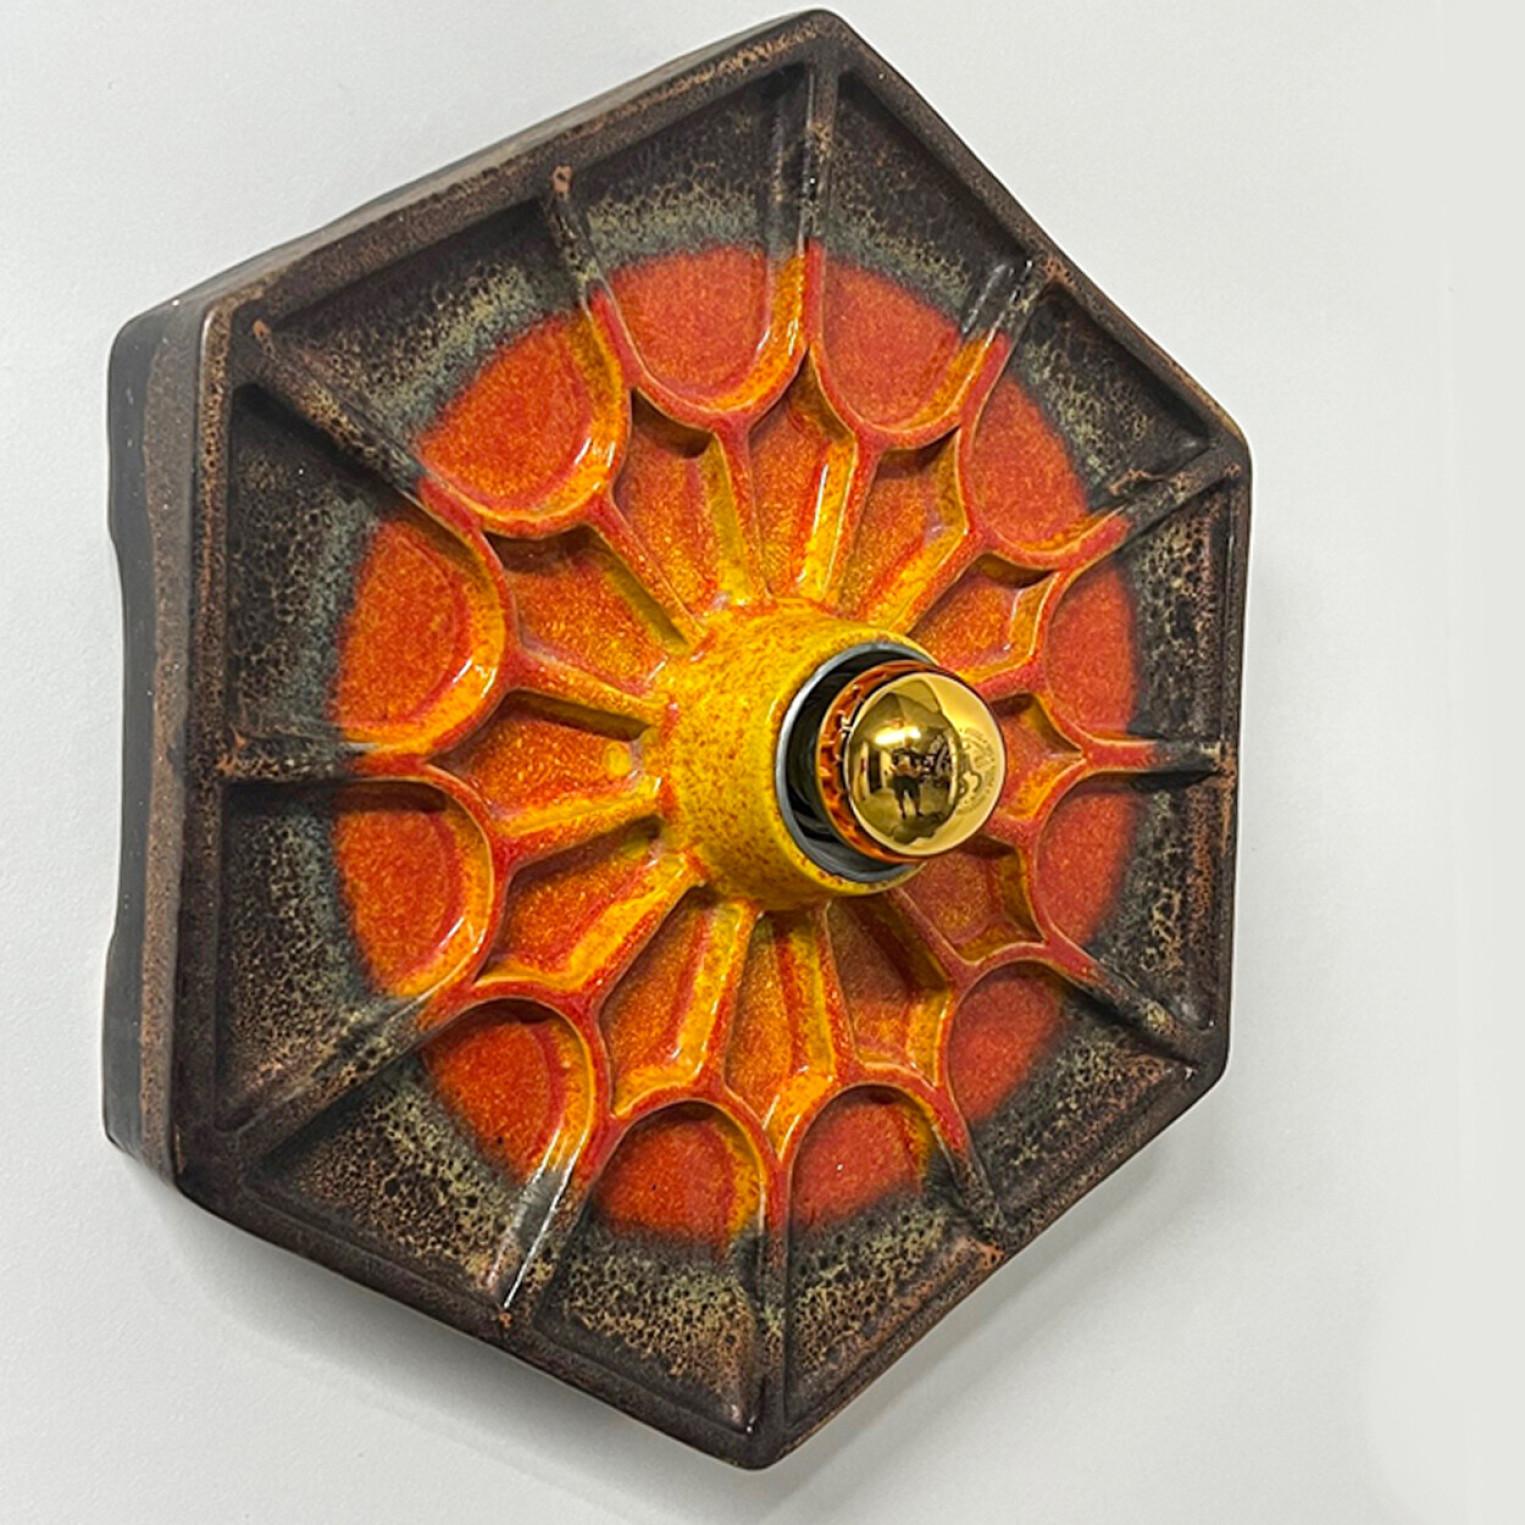 Pair of Orange Hex-shaped Ceramic Wall Lights, Germany, 1970 For Sale 2